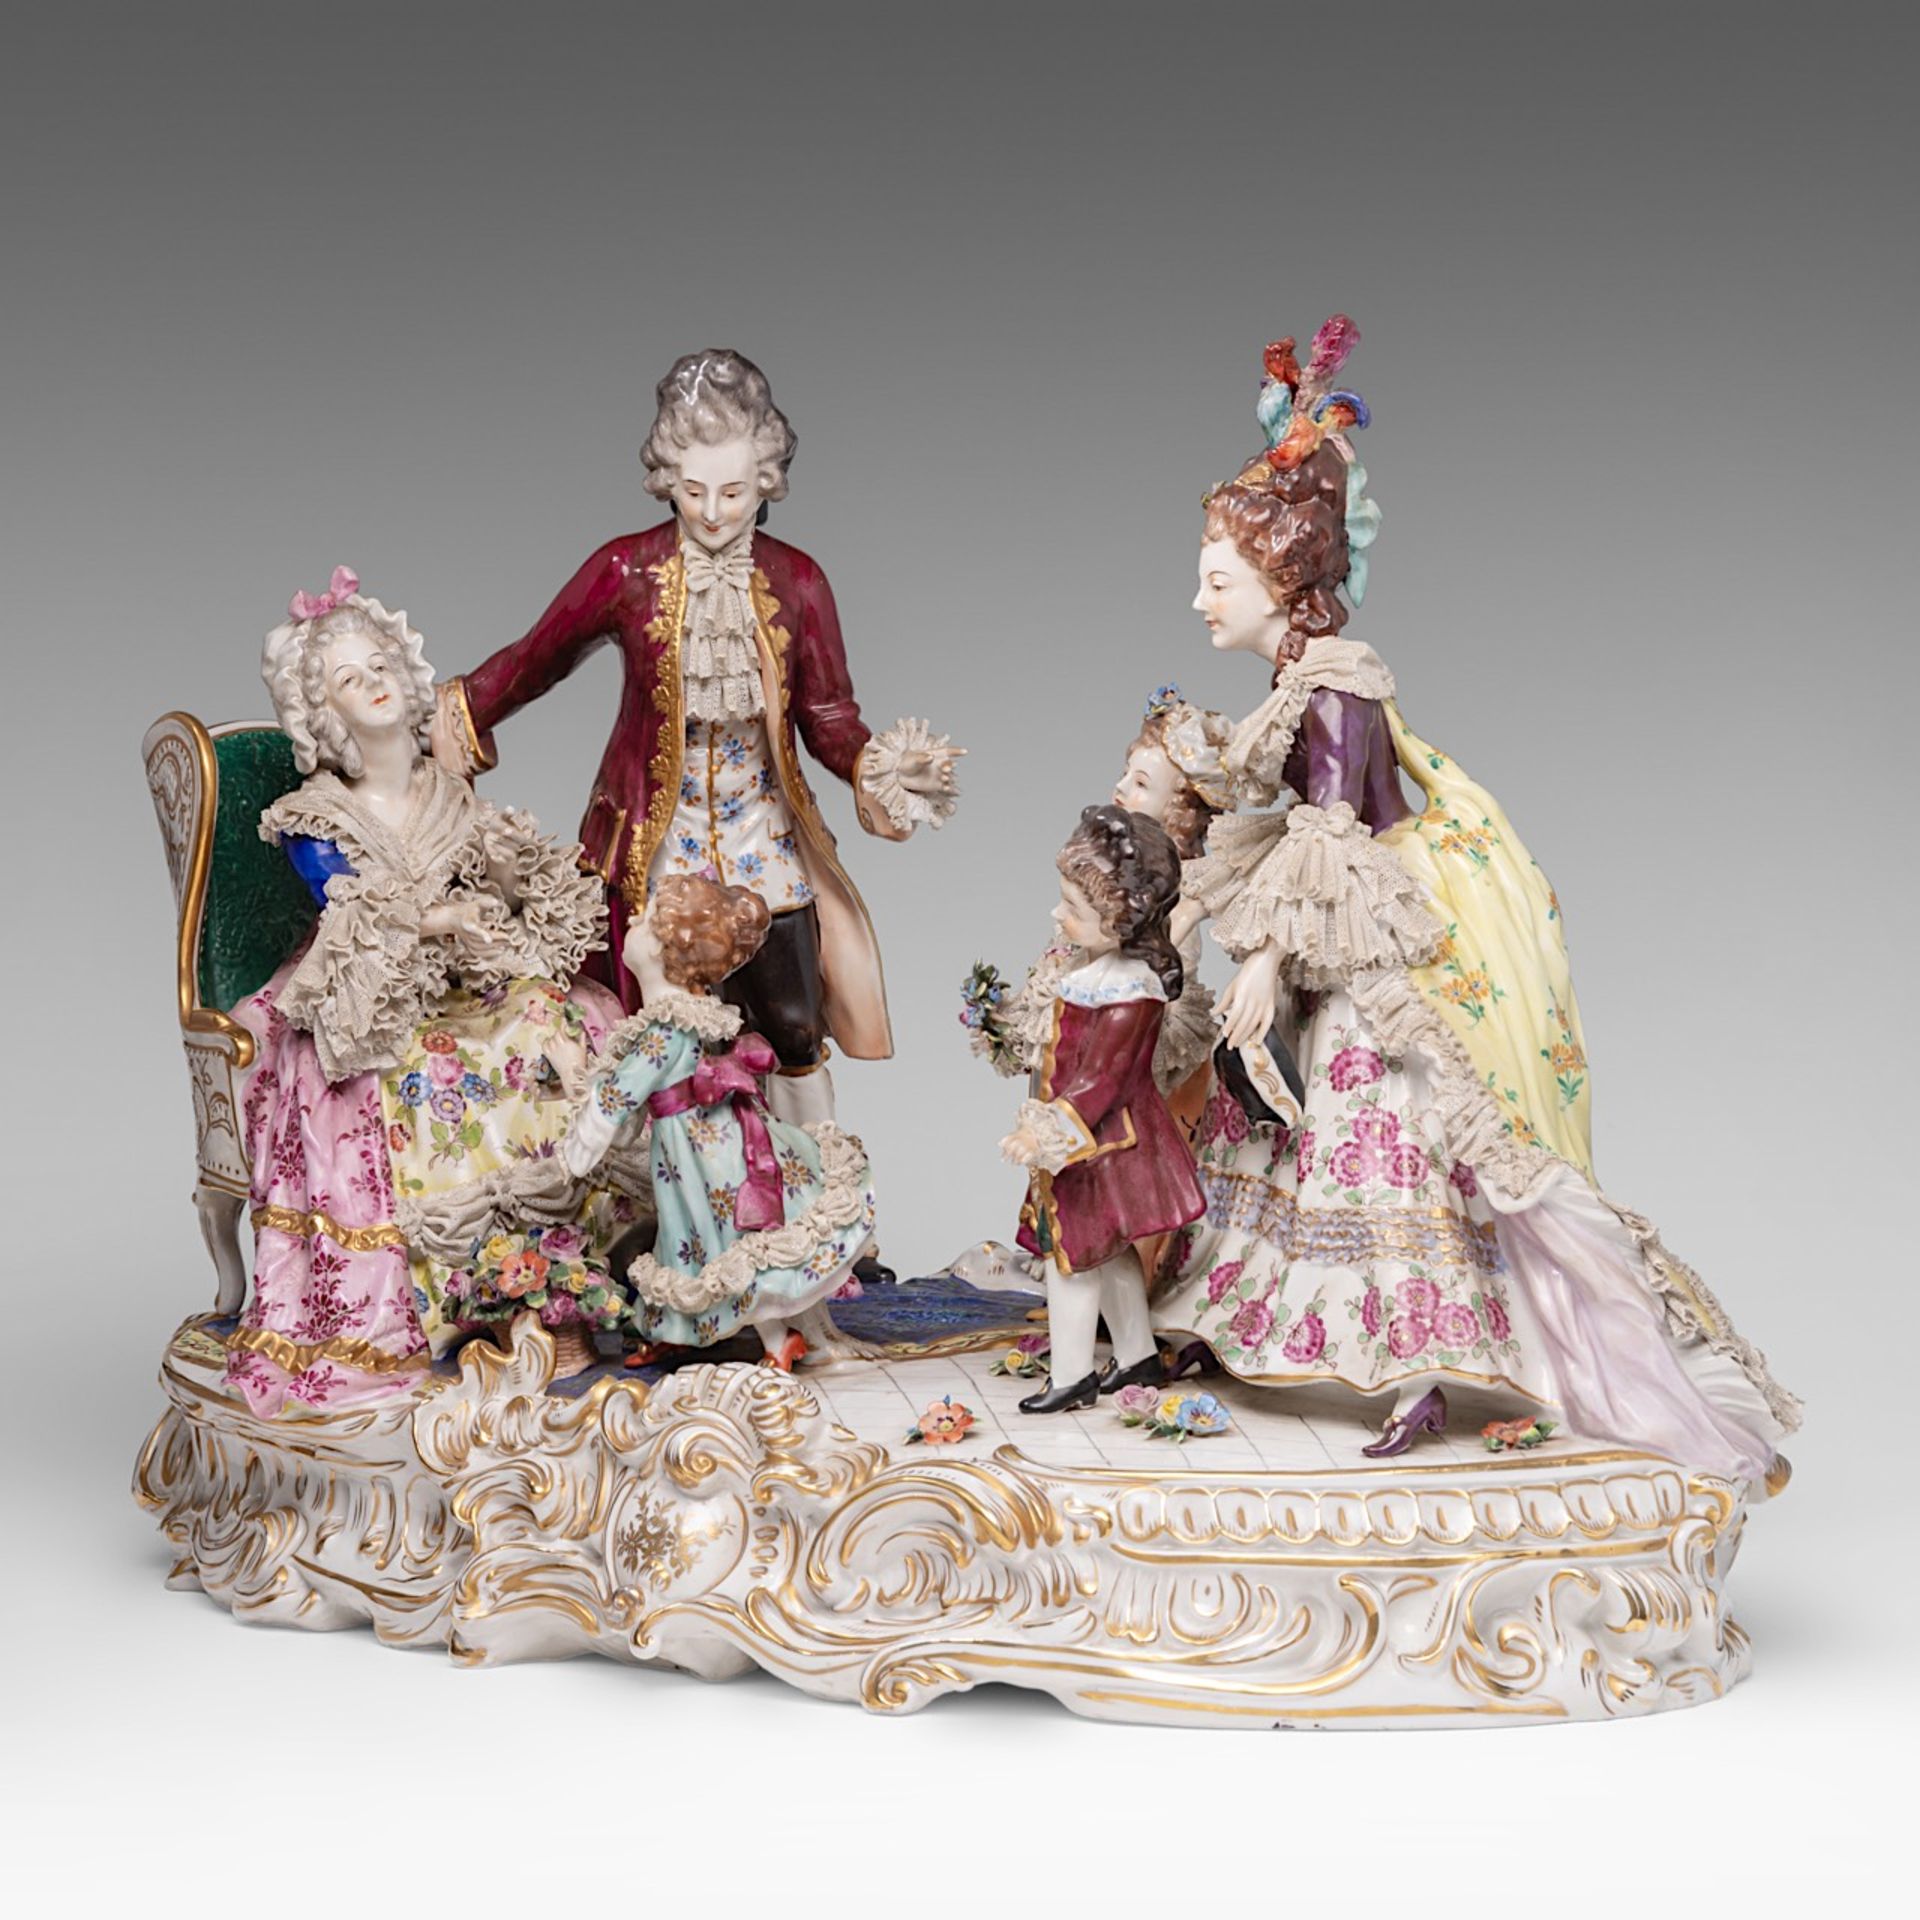 A large Saxony polychrome porcelain group depicting a gallant scene in a Rococo setting, H 40 - W 55 - Image 2 of 15